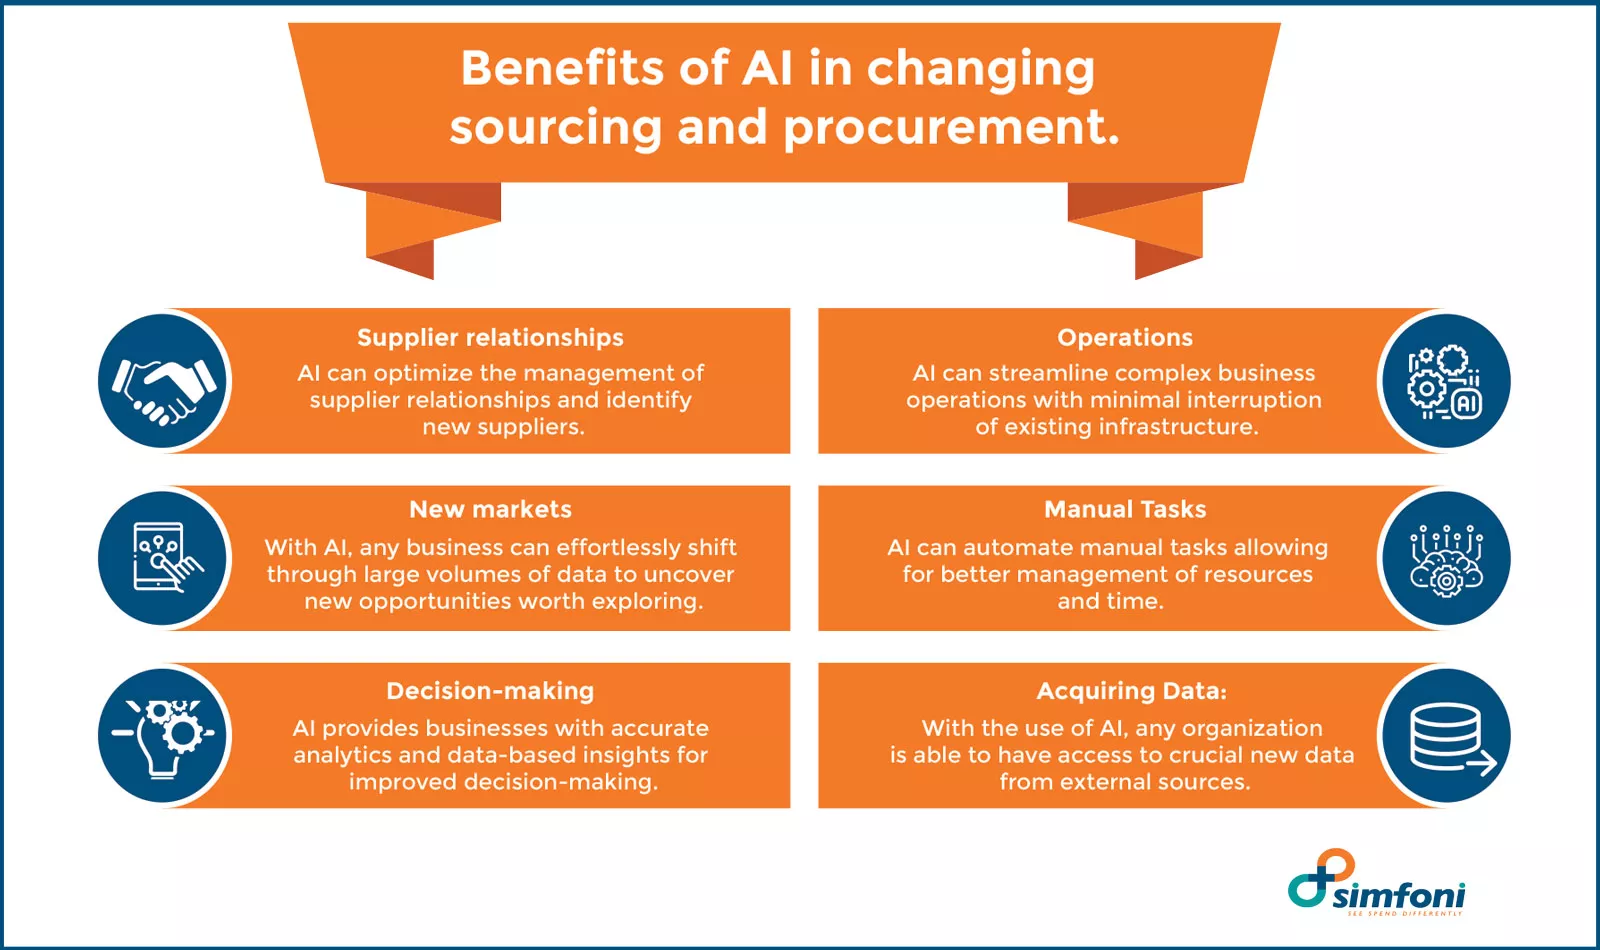 Benefits of AI in Changing Sourcing and Procurement